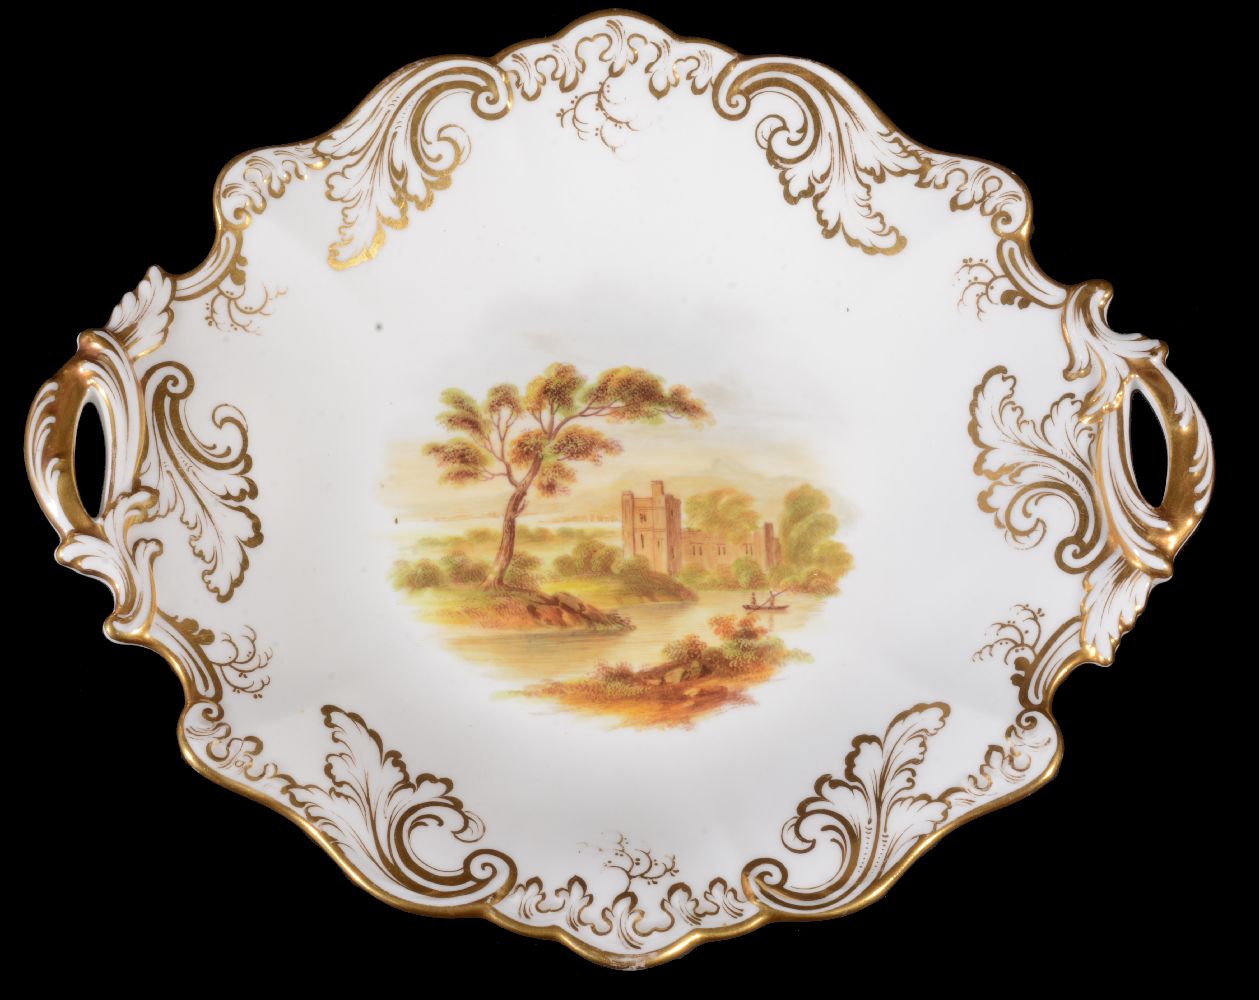 A Ridgway porcelain rococo revival part dessert service, mid 19th century, painted with landscape - Image 3 of 20